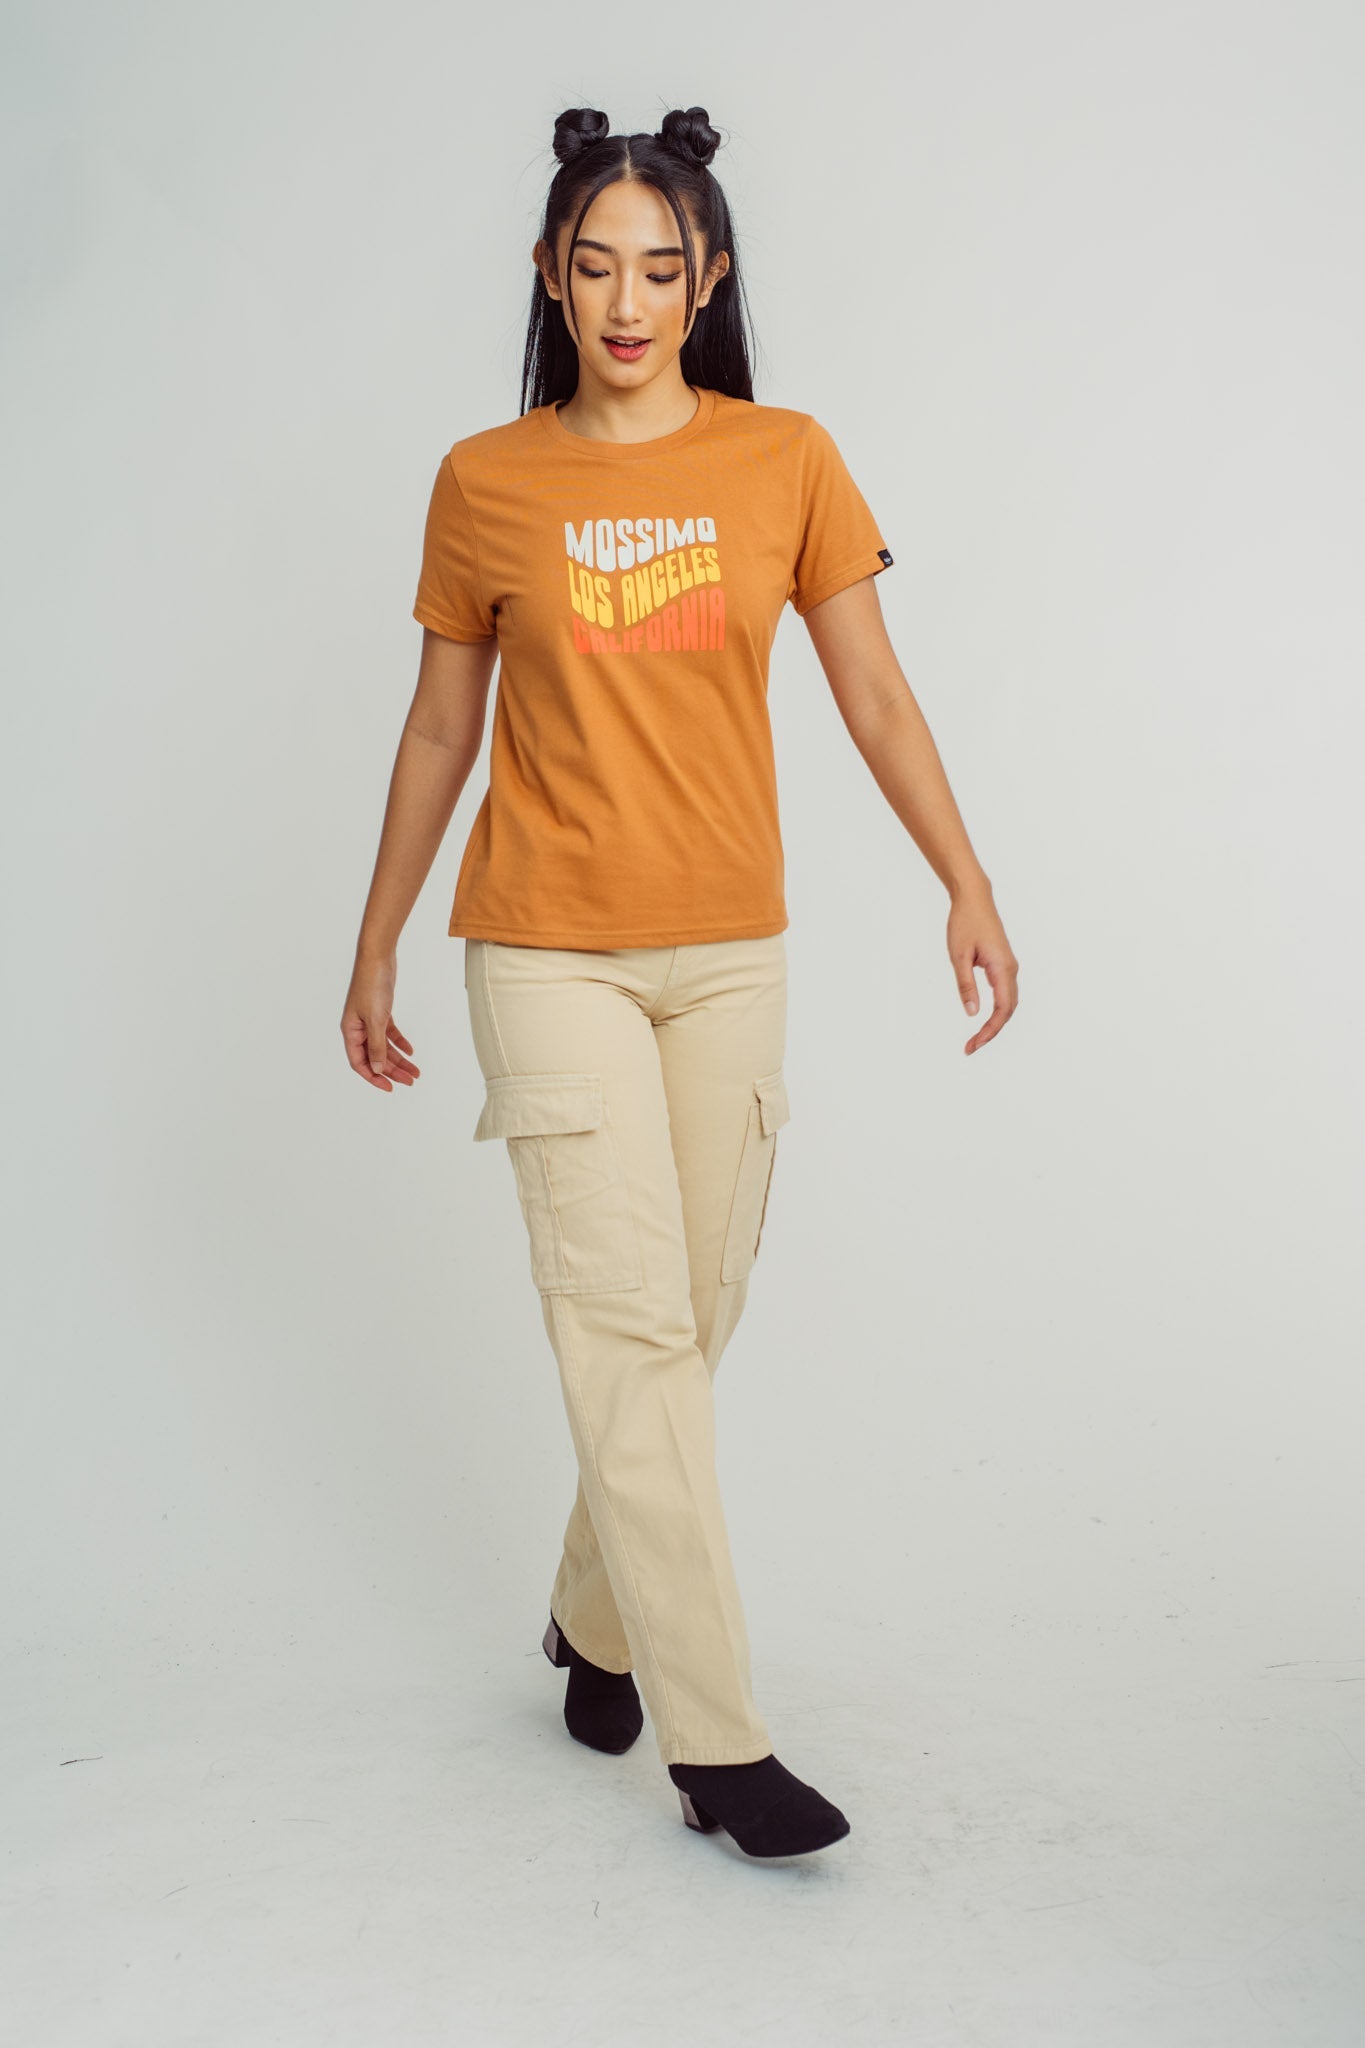 Cashew Mossimo Los Angeles California Retro Text with Flat Print Classic Fit Tee - Mossimo PH